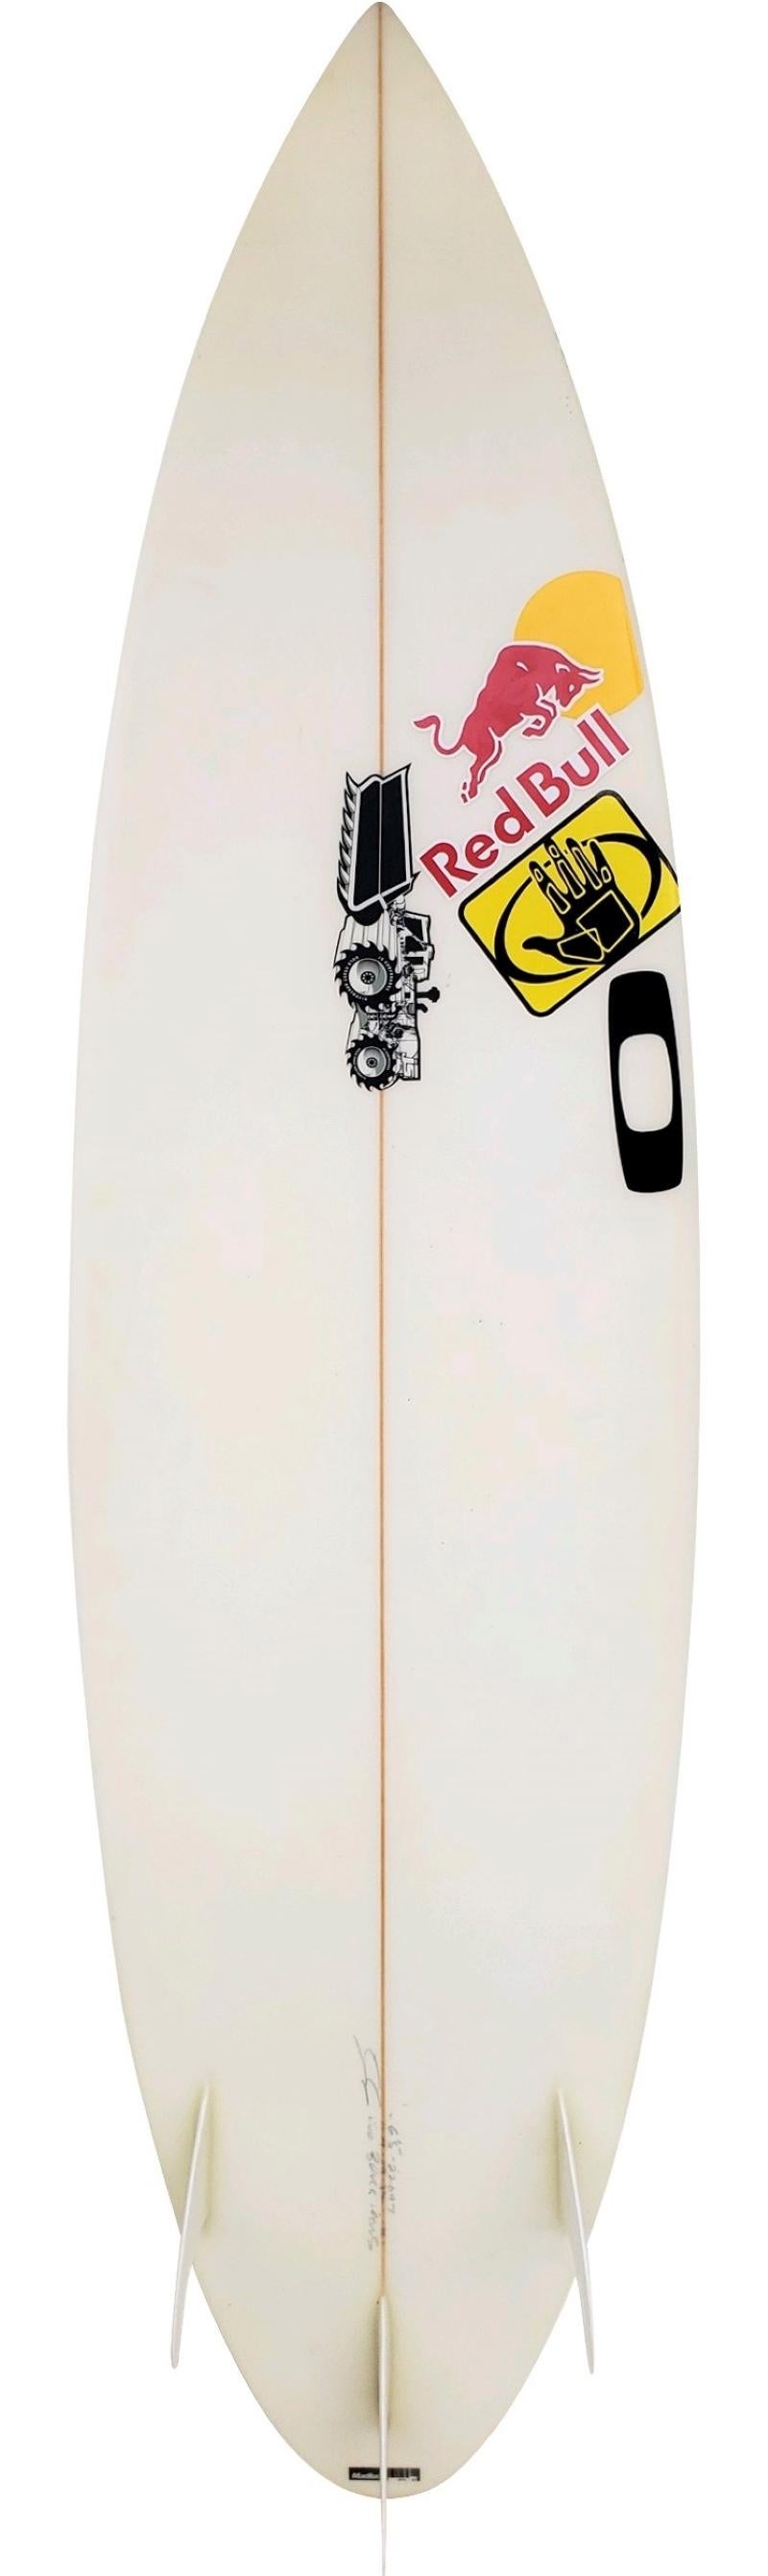 Bruce Iron's personal surfboard shaped under the JS label. This shortboard was made for the professional surfer Bruce Irons. Signed and dated 2008 by the legendary surfer known for his radical aerial maneuvers and fearless barrel riding abilities.